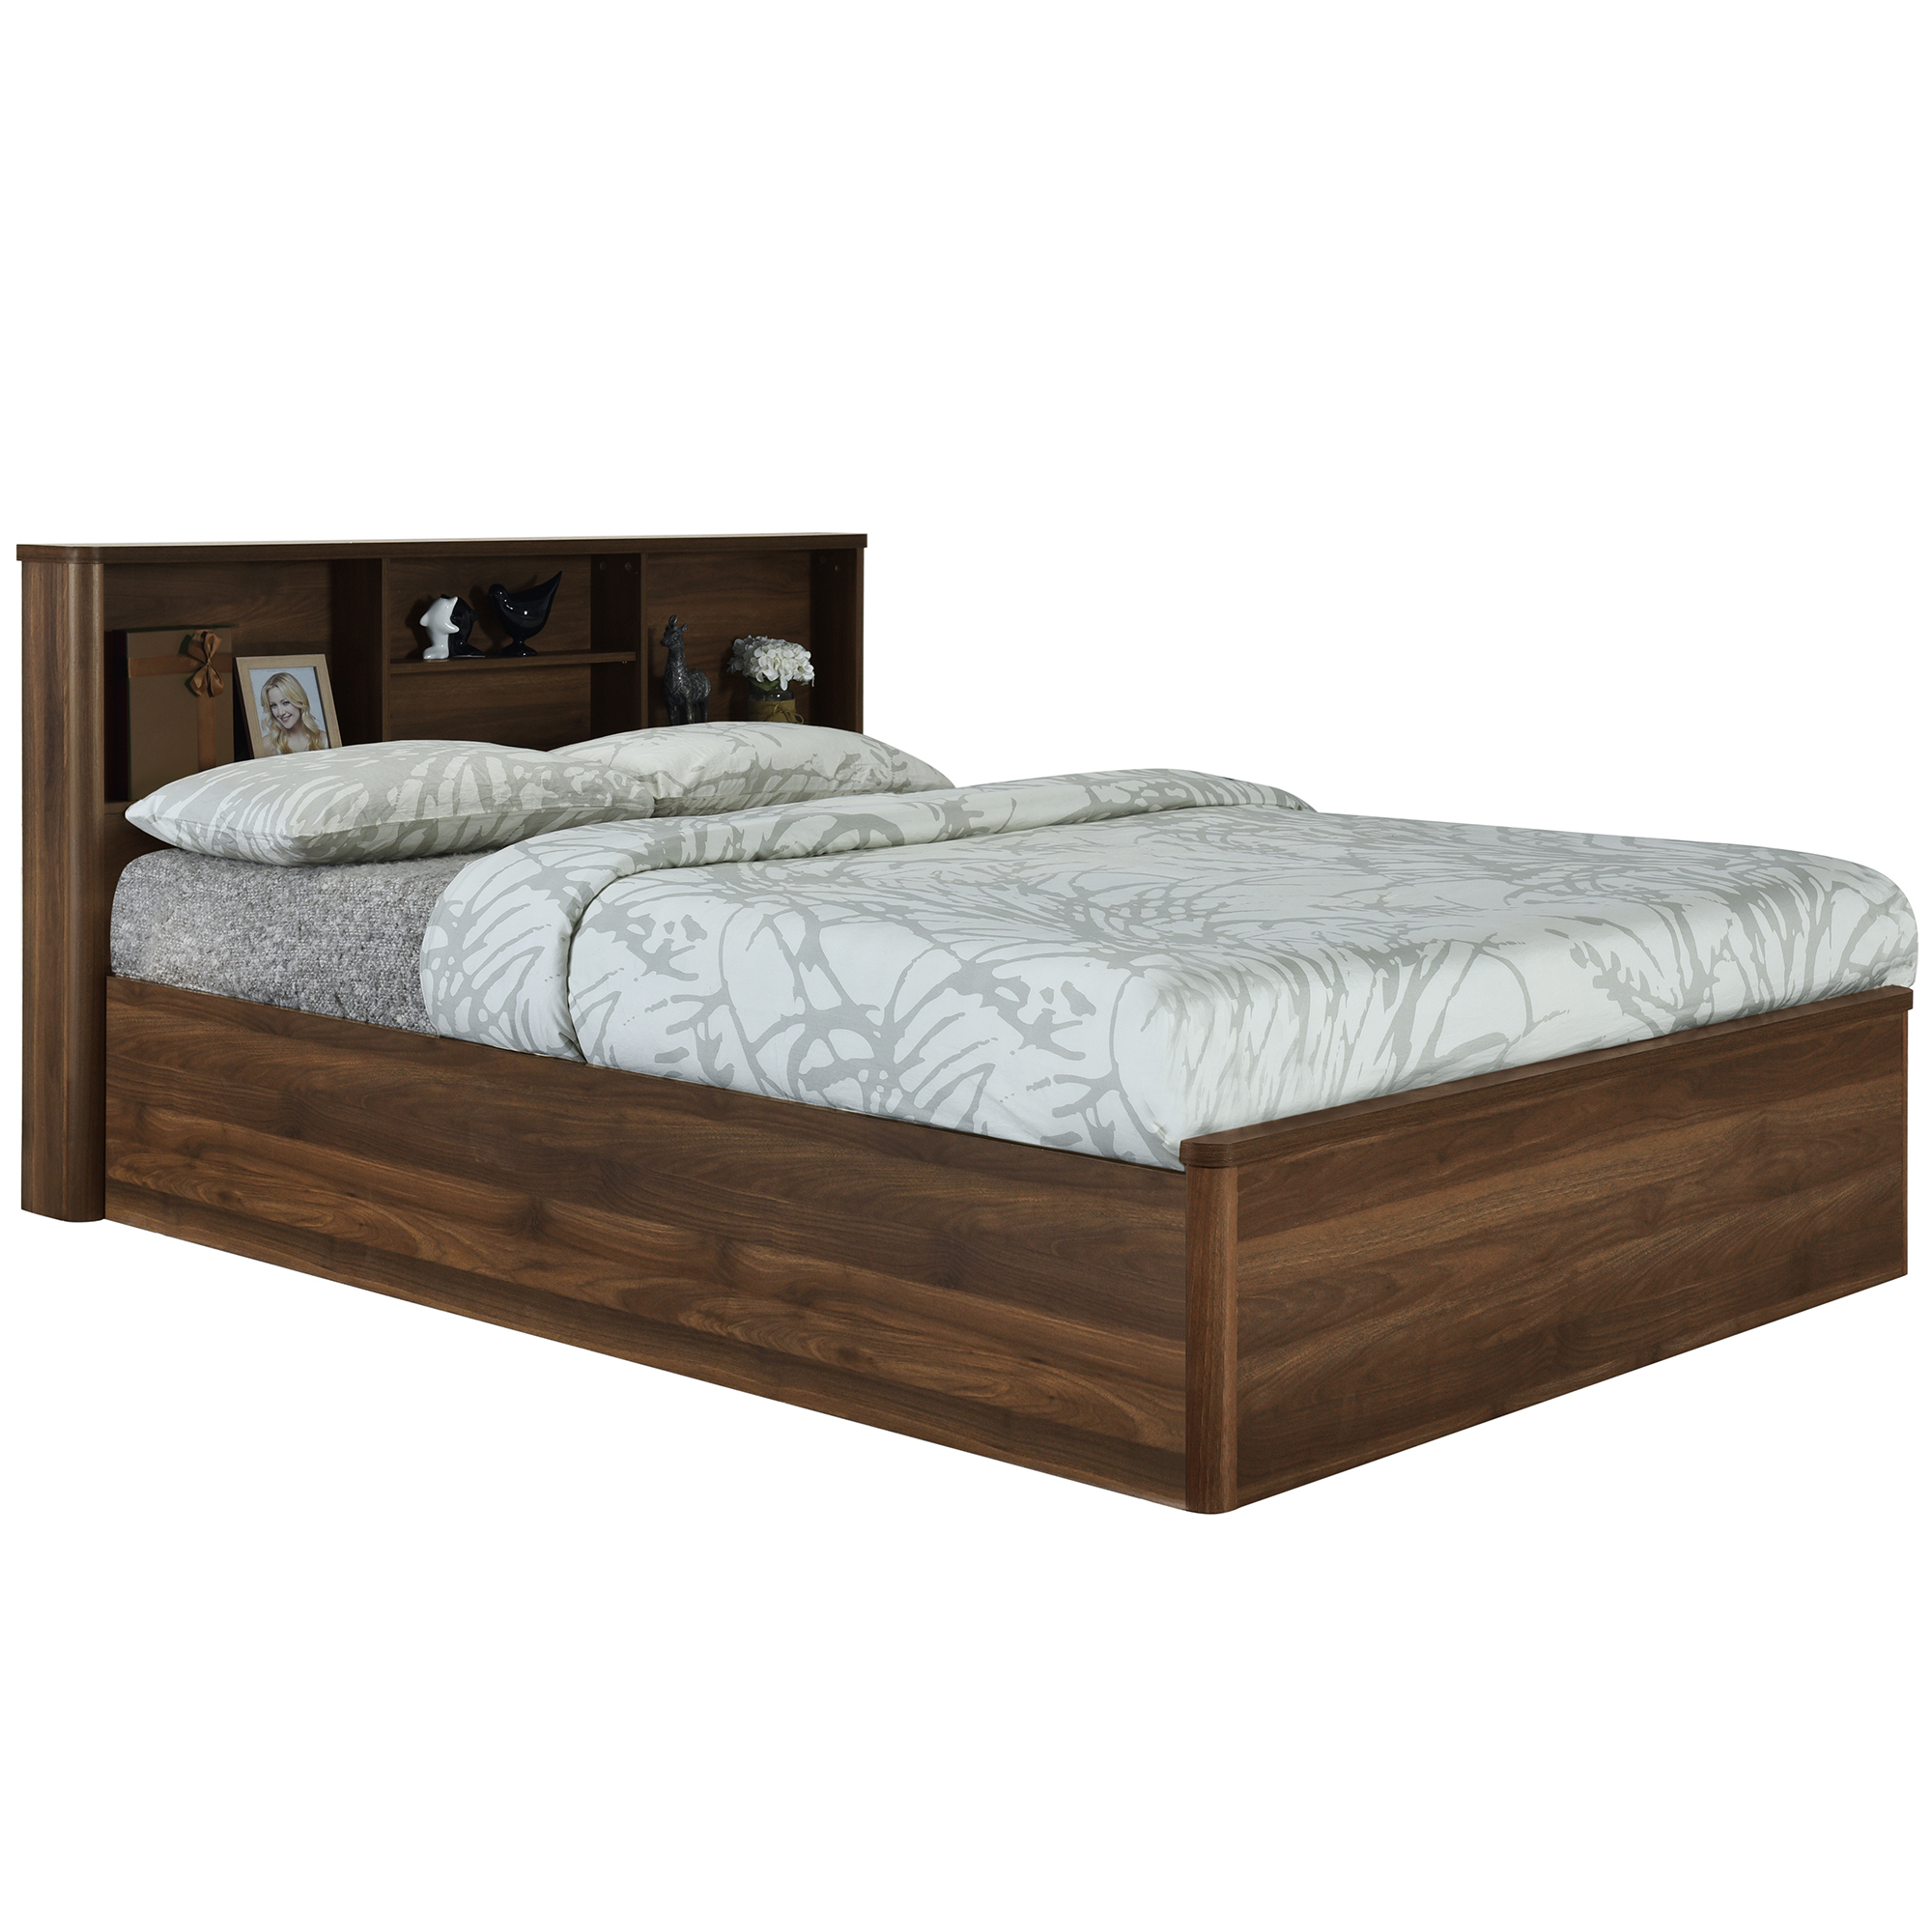 Core Living Anderson Queen Bed With, King Single Bed With Bookcase Headboard